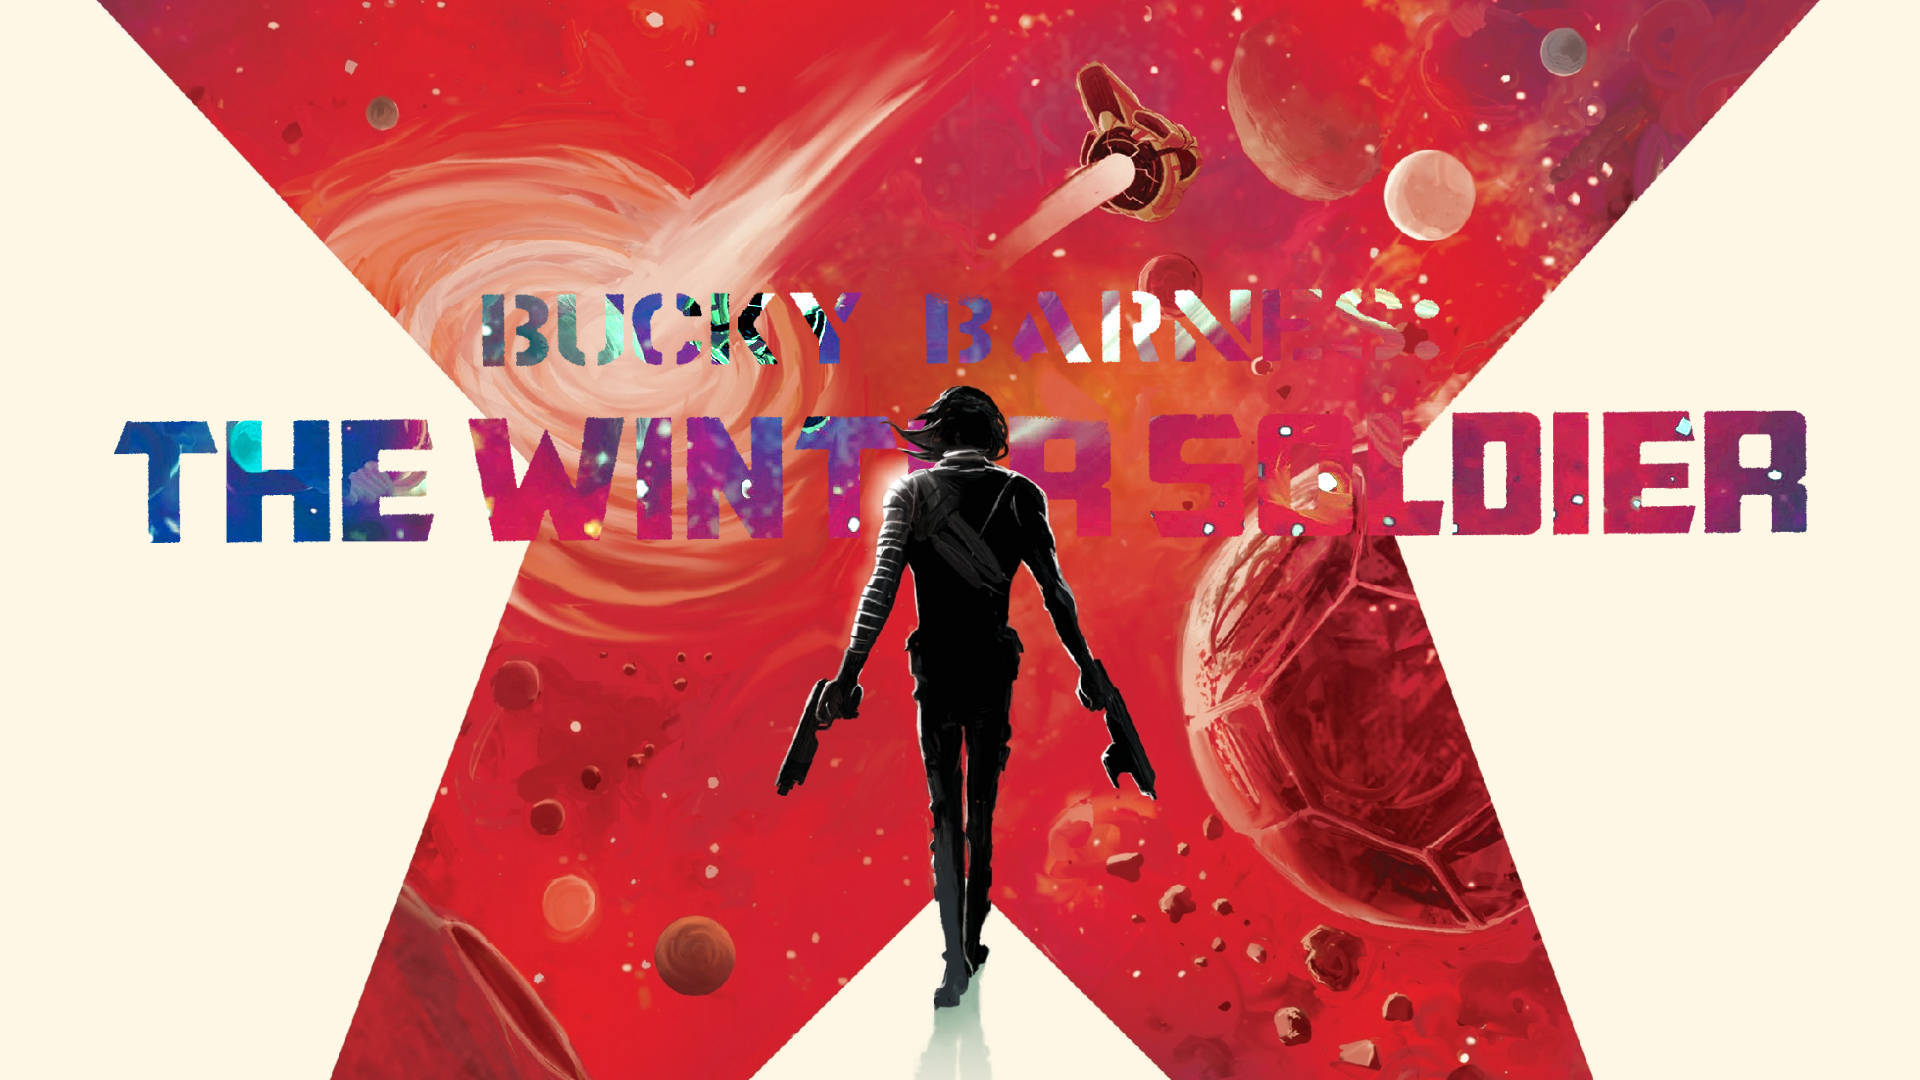 Bucky Barnes The Winter Soldier Background